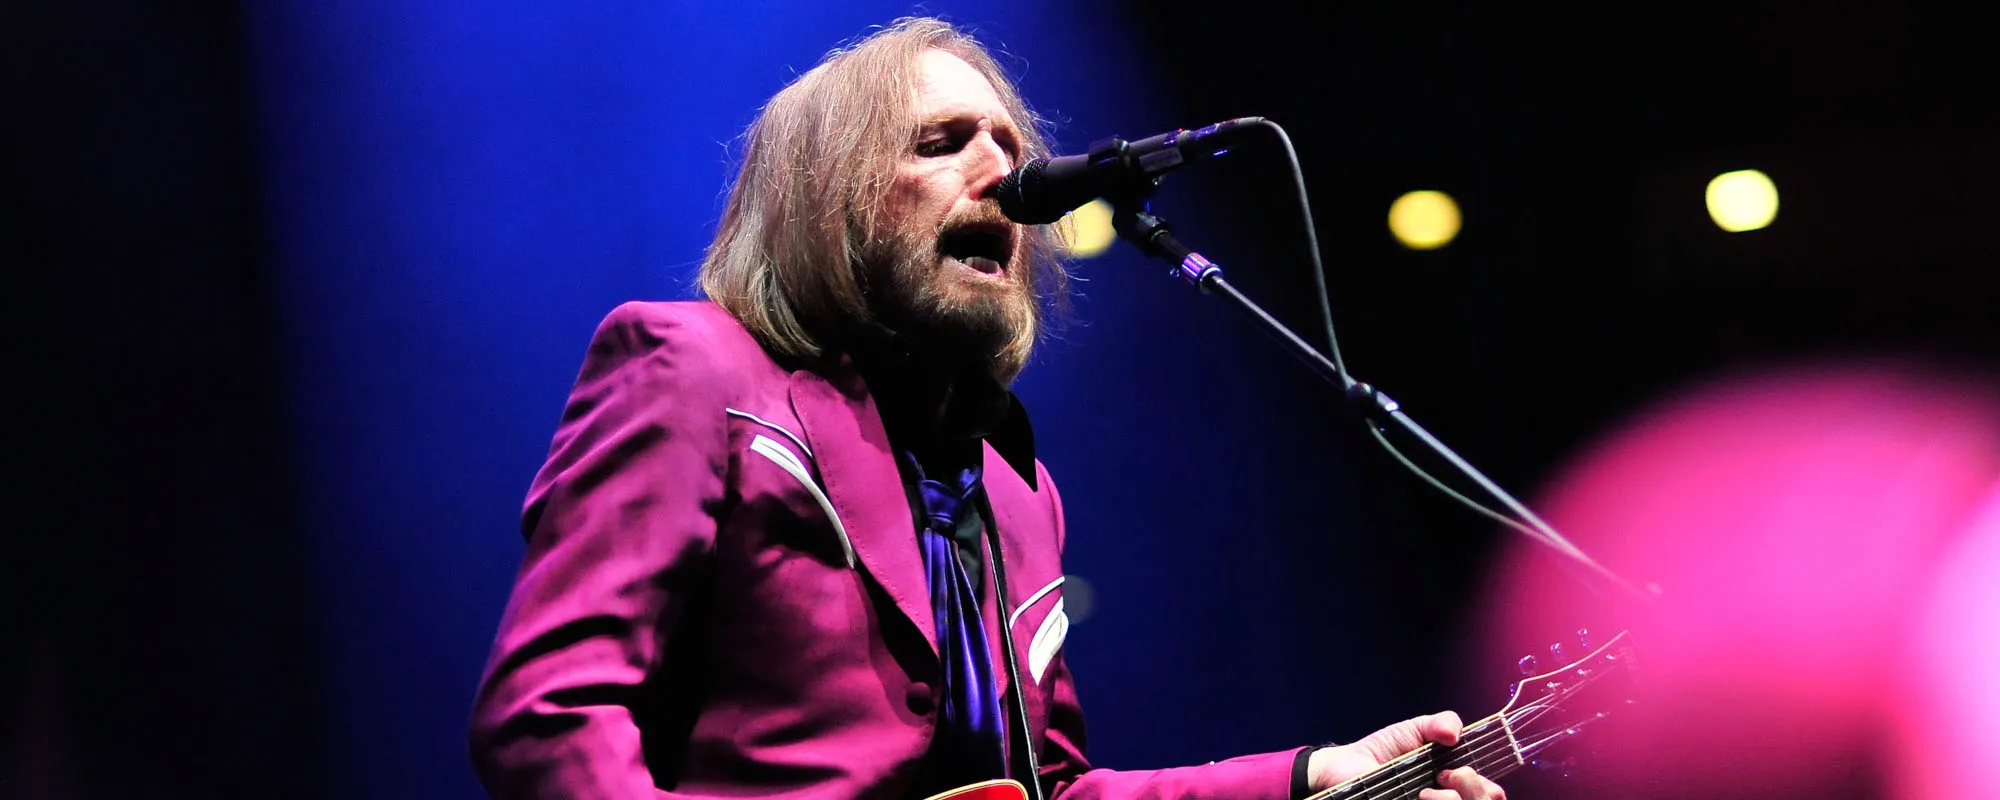 The Meaning Behind “Runaway Trains” by Tom Petty and the Heartbreakers and Why it Caused a Rift with Stevie Nicks